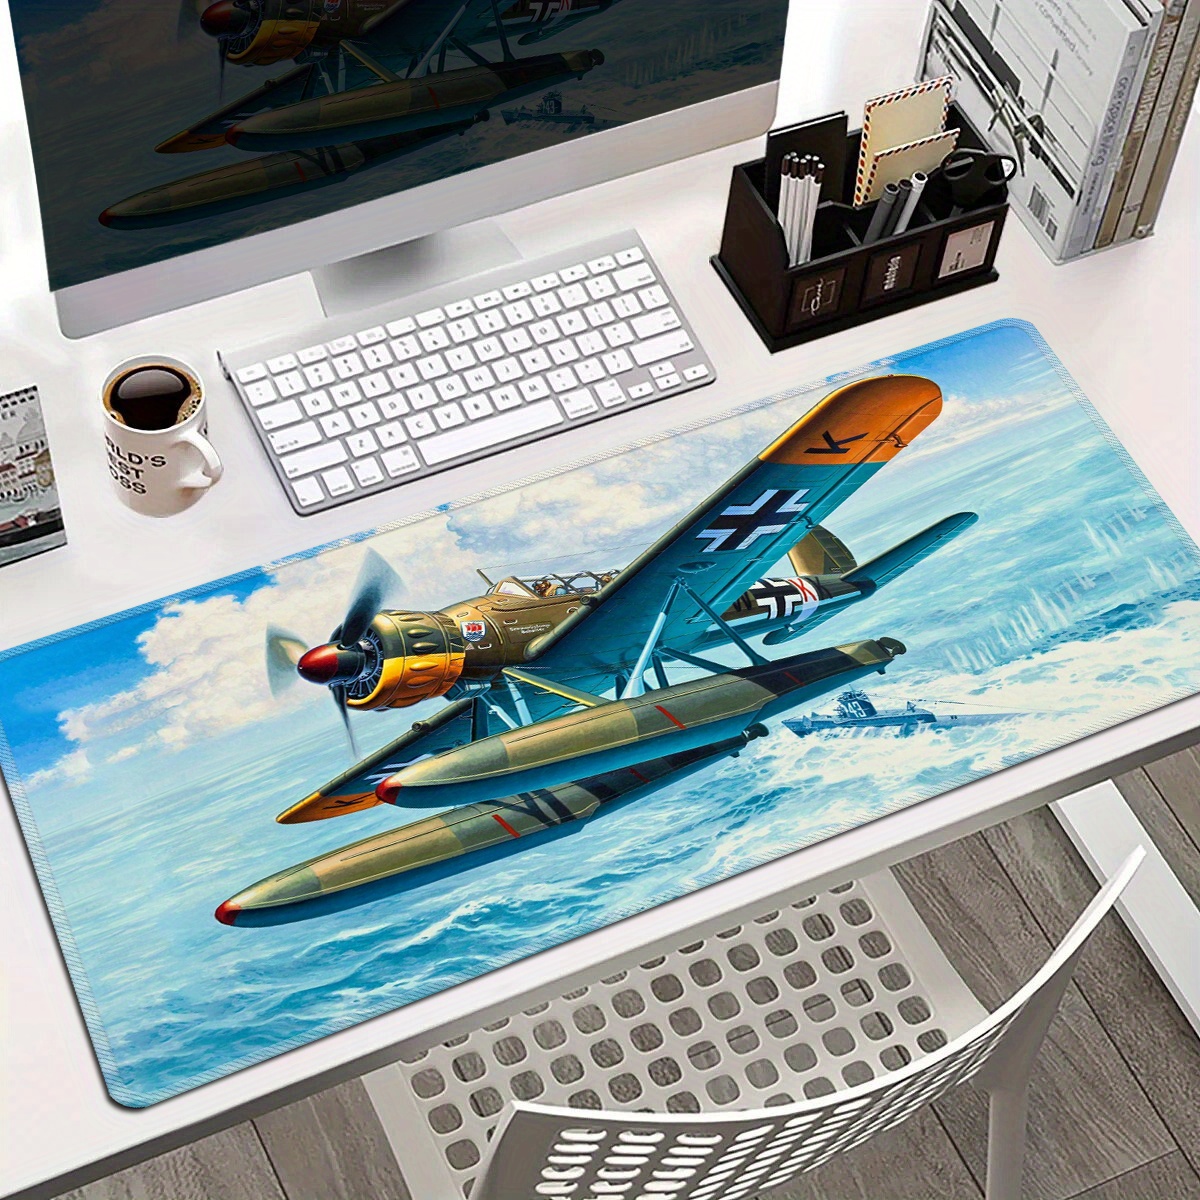 

Airplane Mouse Pad, Washable Non-slip Rubber Office Keyboard Pad, Premium Computer Accessories, 35.4*15.7inch Rectangular Desk Pad Laptop Pad, Thick Mouse Pad Computer Desk Protector Mat